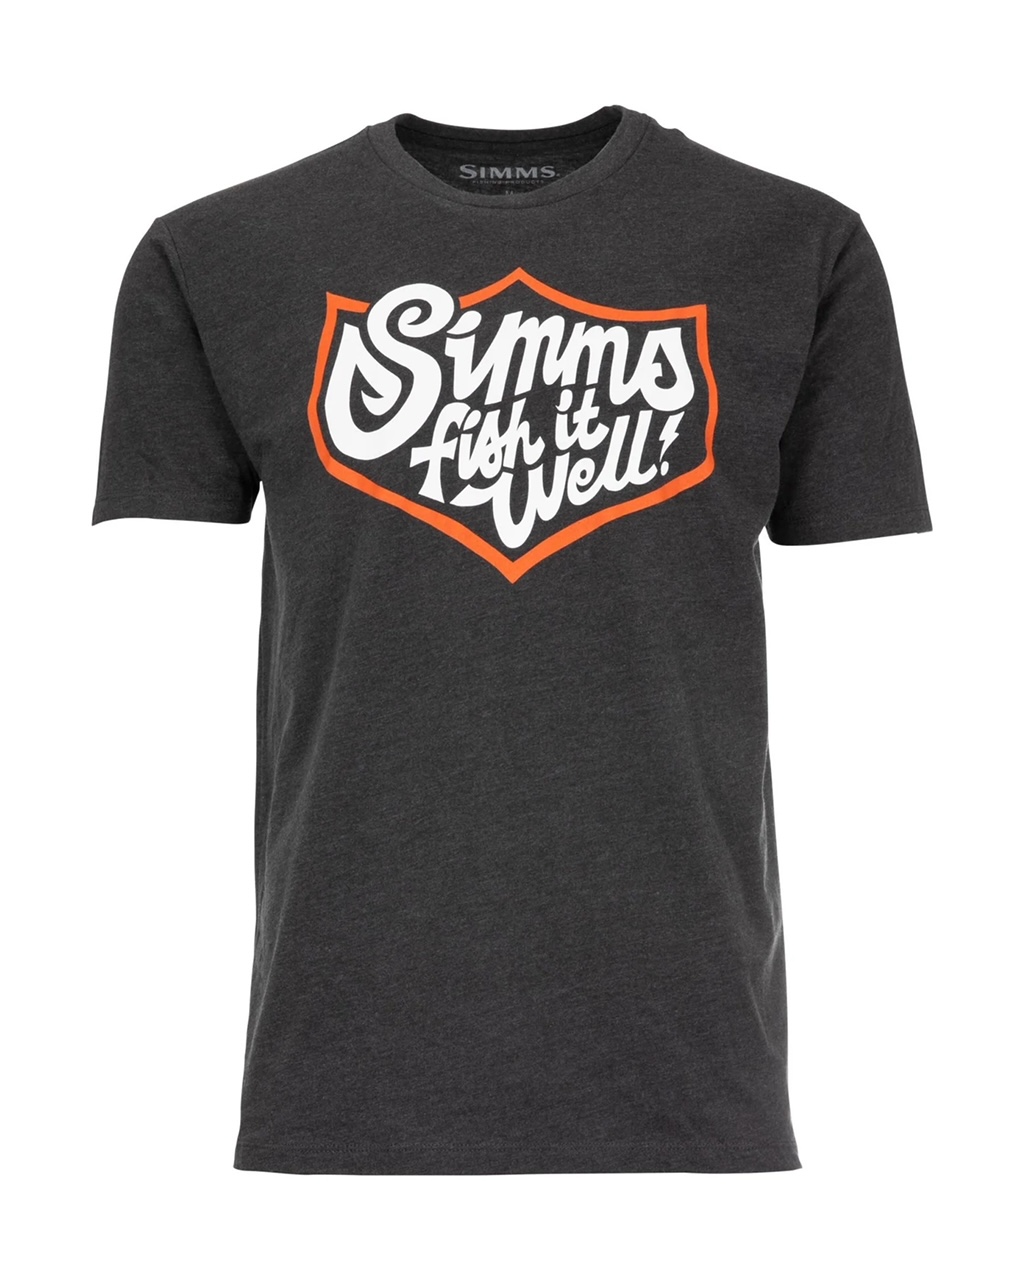 Simms M's Fish It Well Badge T-Shirt - Charcoal Heather - XL